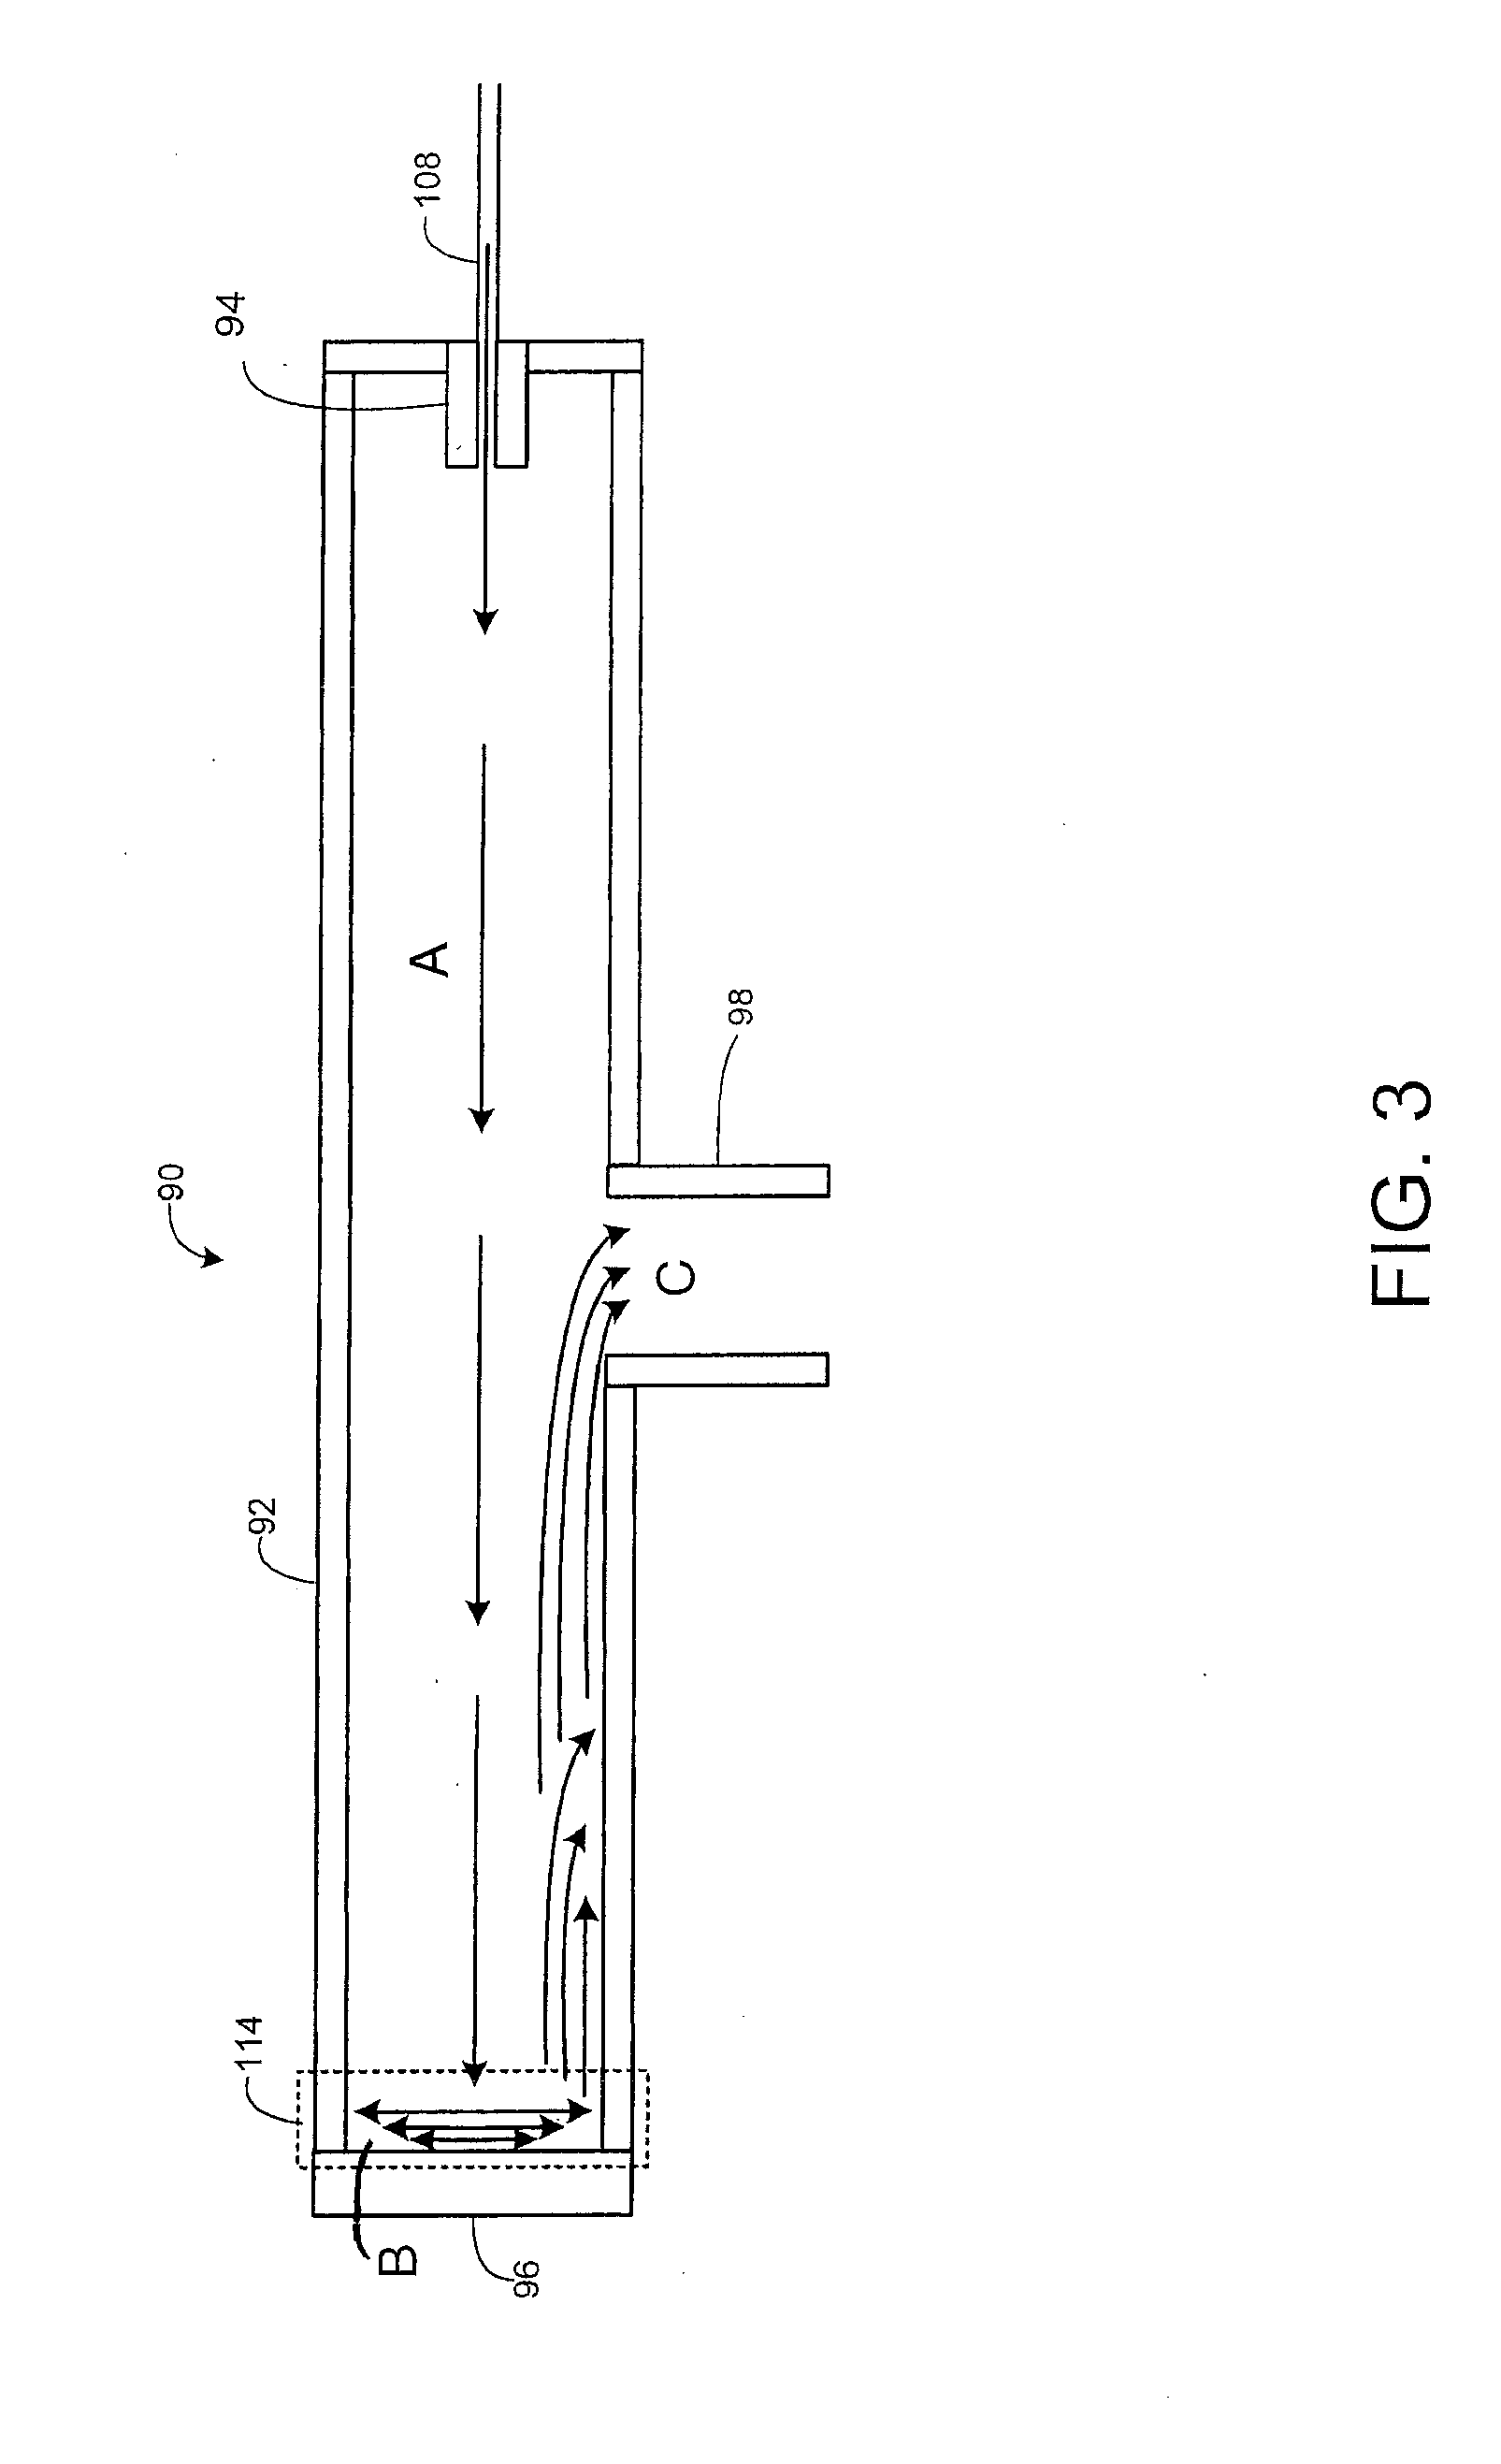 Biofuel production method and system